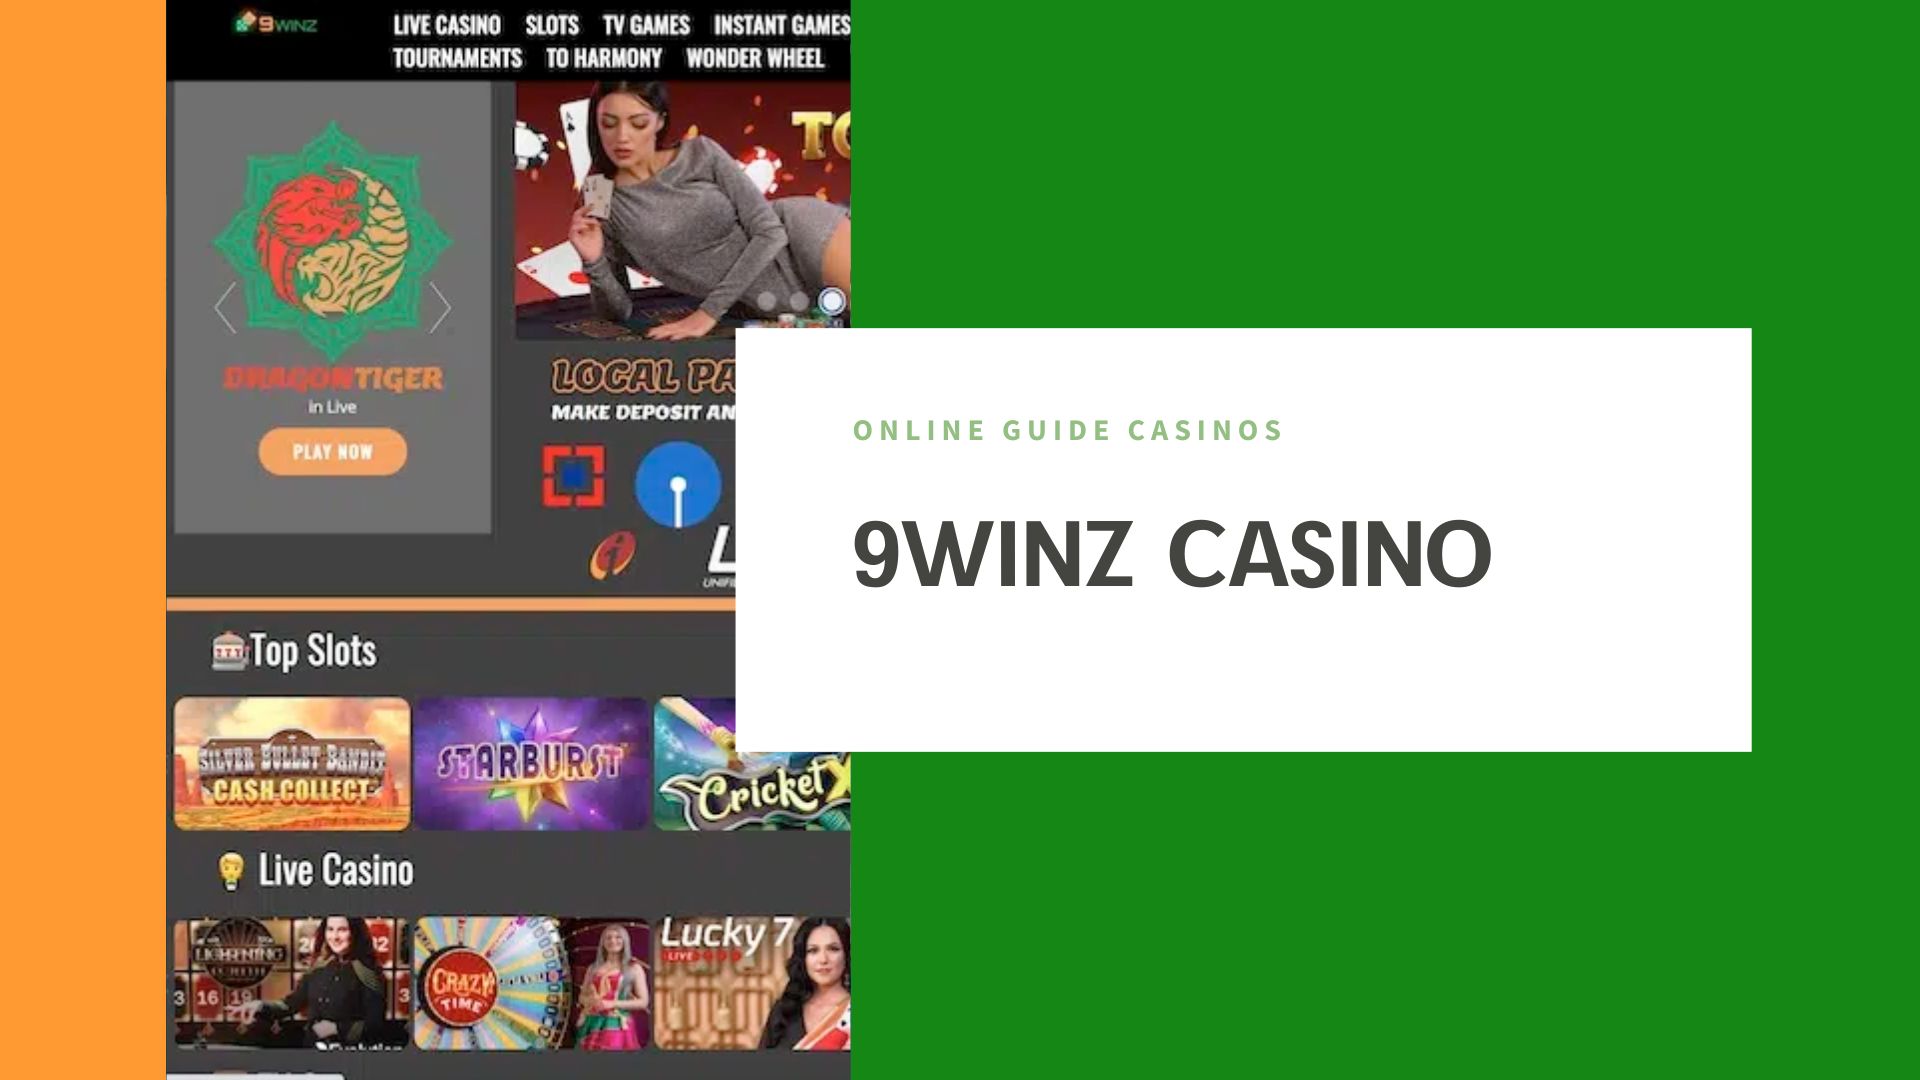 9Winz Online Casino - All About Gambling Titan for Indians